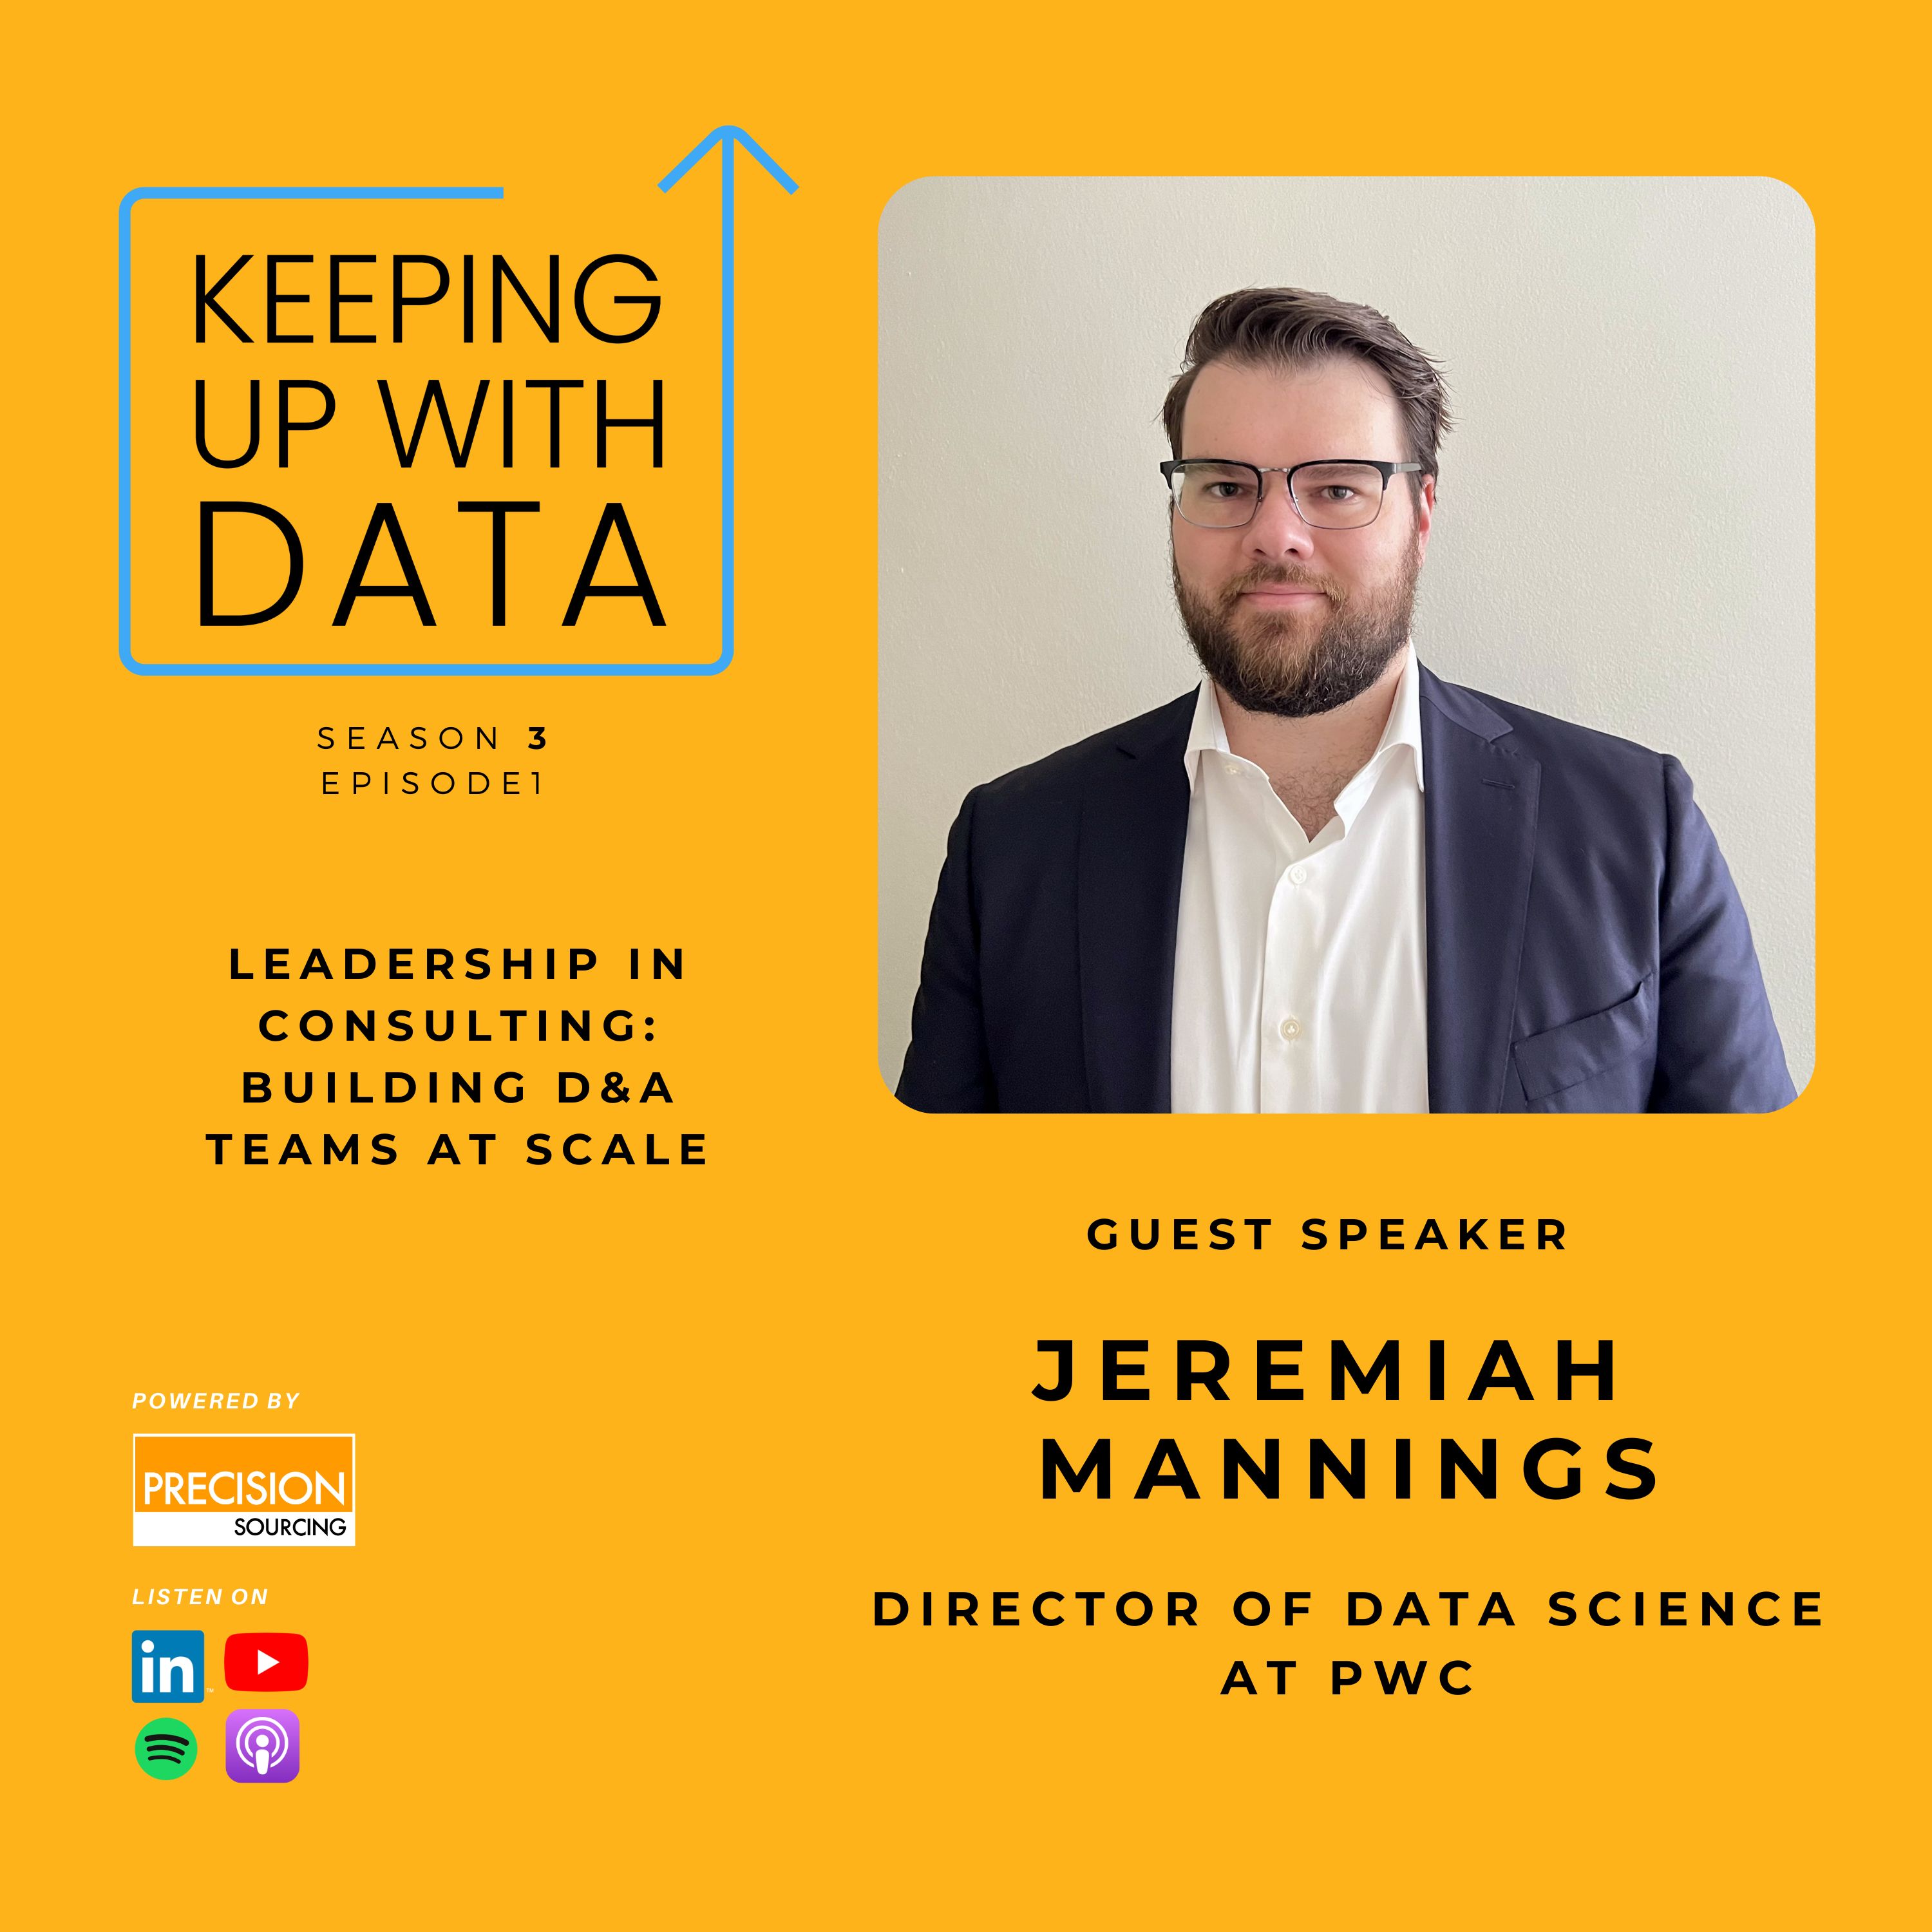 Leadership In Consulting: Building D&A Teams At Scale With Jeremiah Mannings